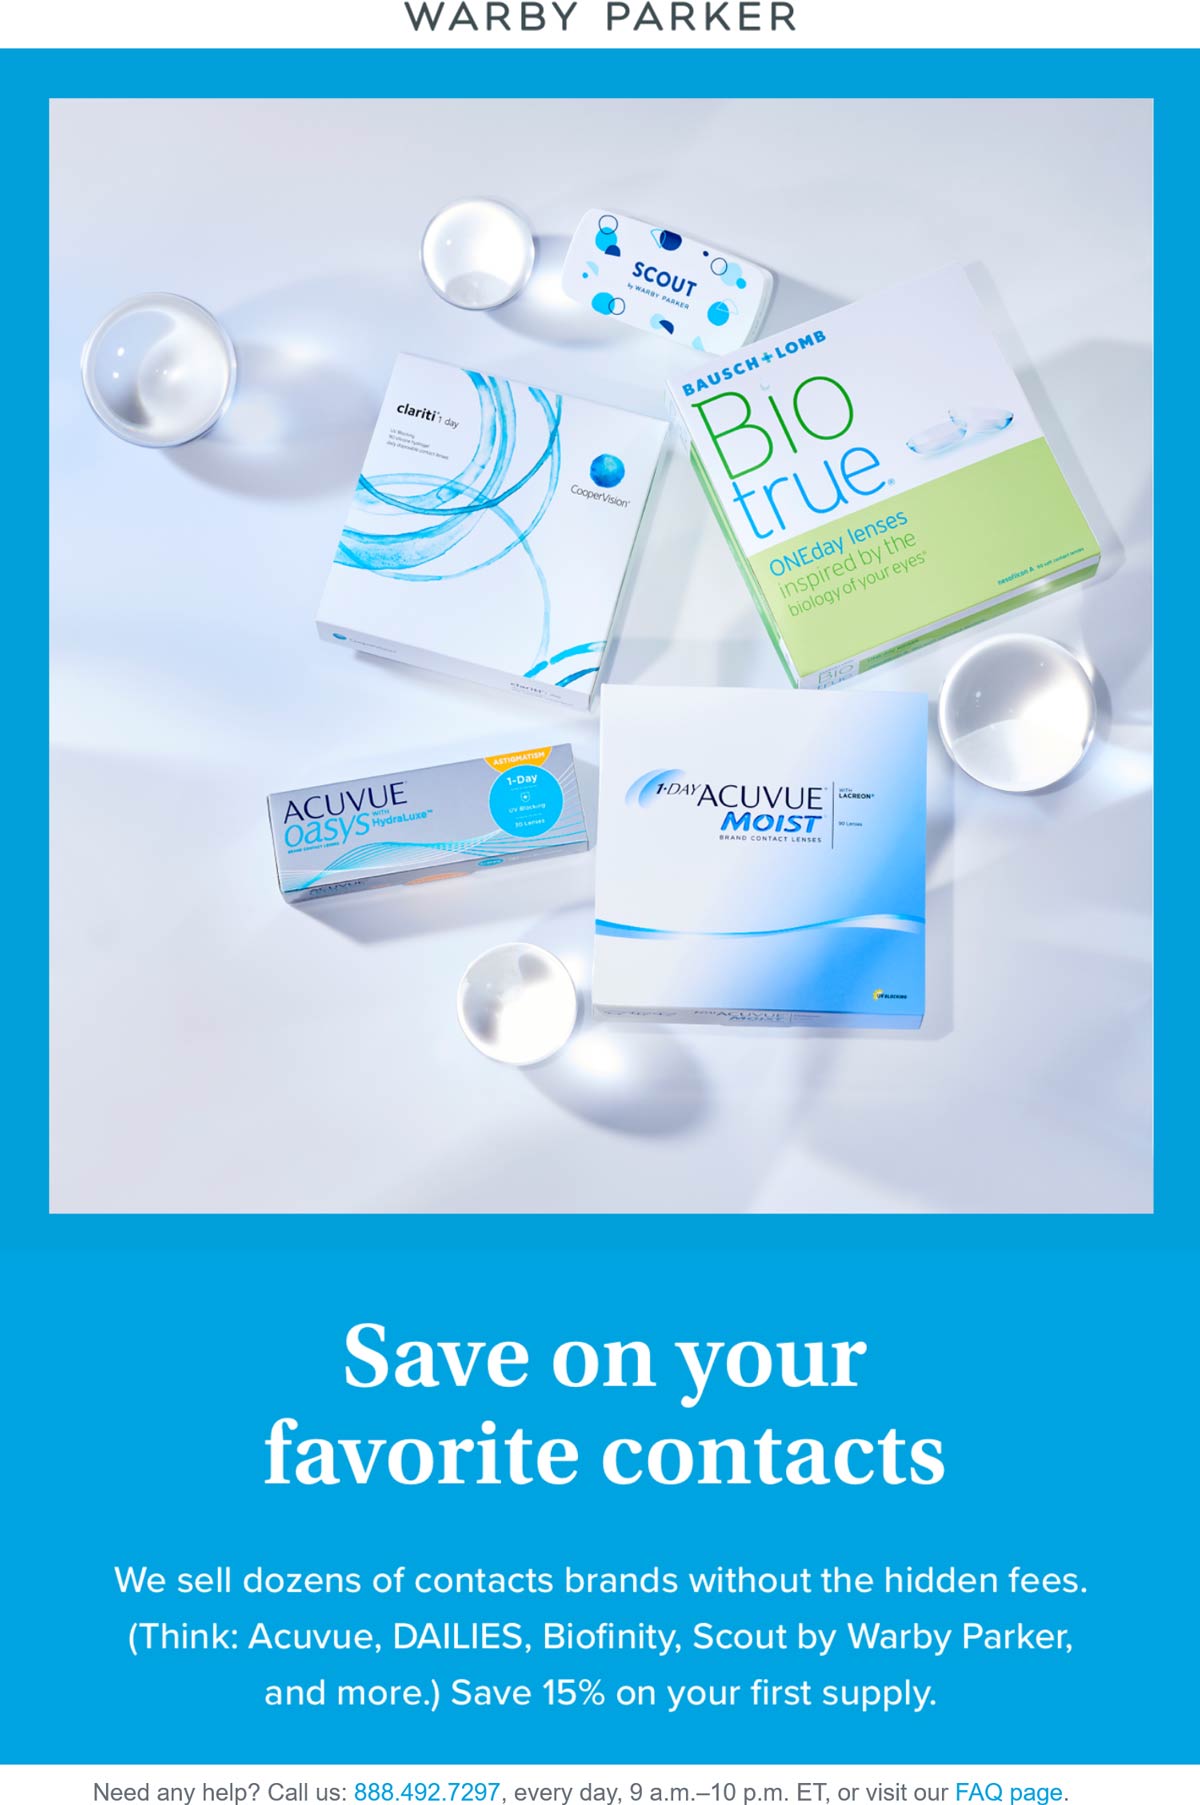 Warby Parker restaurants Coupon  15% off first order of contact lenses at Warby Parker #warbyparker 